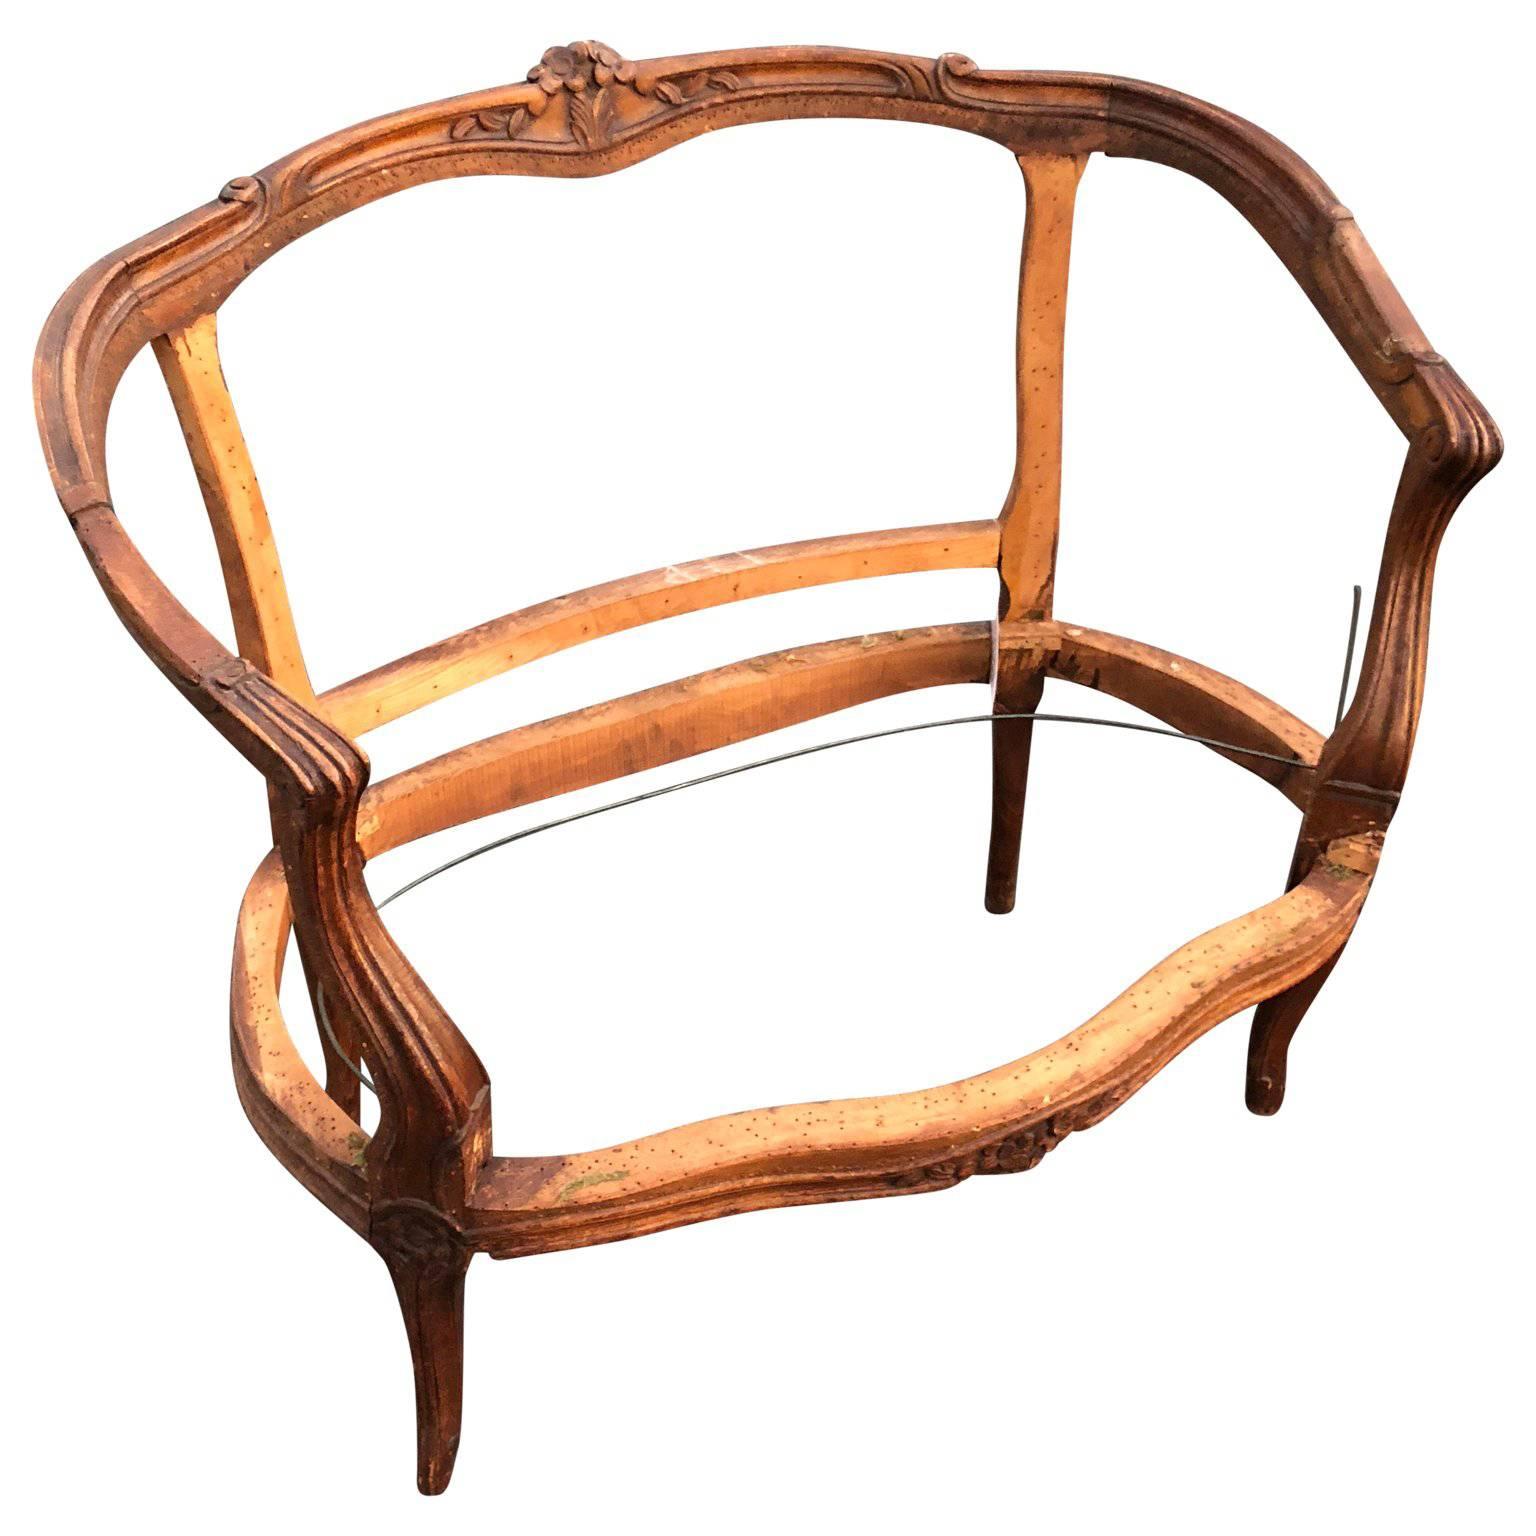 French Rococo Two-Seat Settee Arm Chair Frame